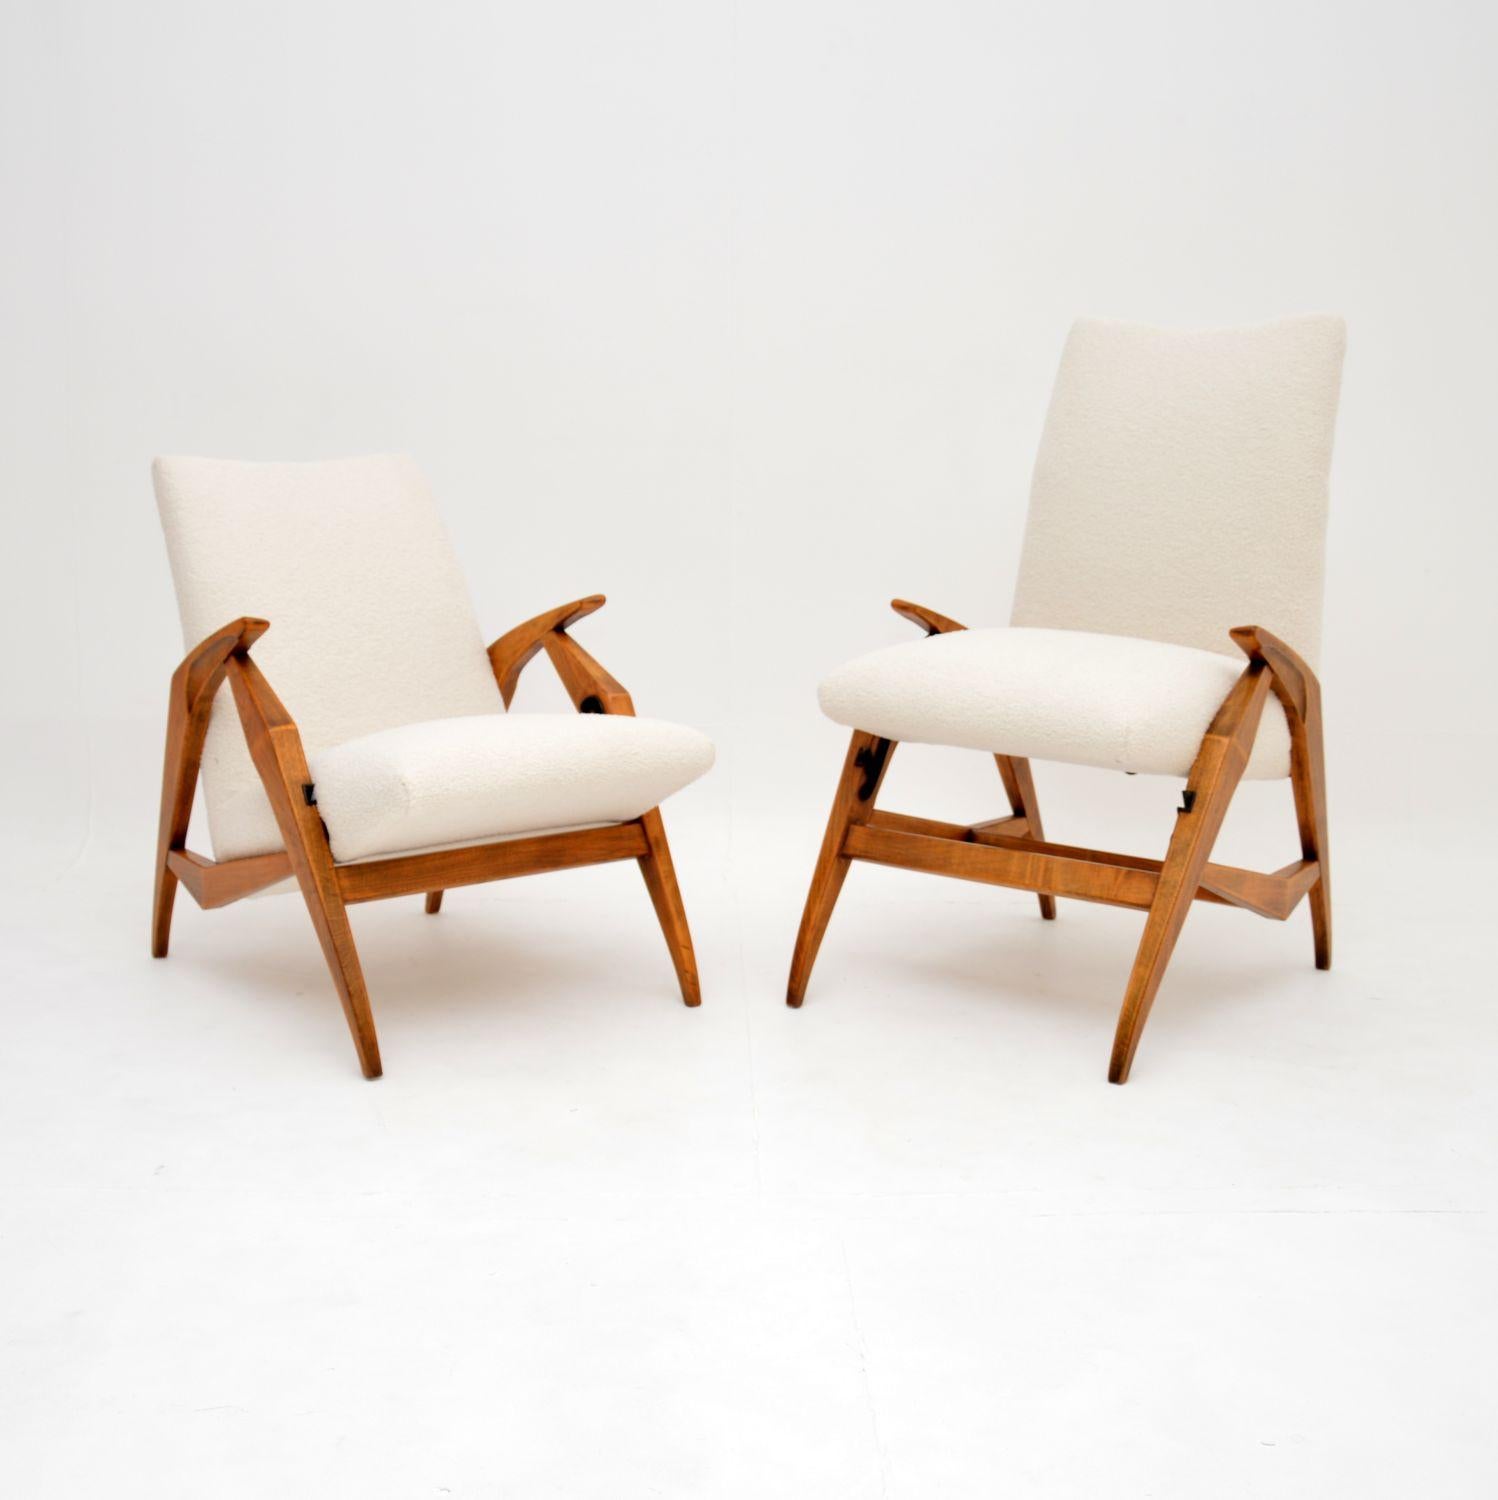 A beautiful and highly unusual pair of metamorphic armchairs that can convert from lounge chair height to dining chair height. They were made in Italy, they date from the 1960’s.

The quality is outstanding, they have an incredibly stylish and